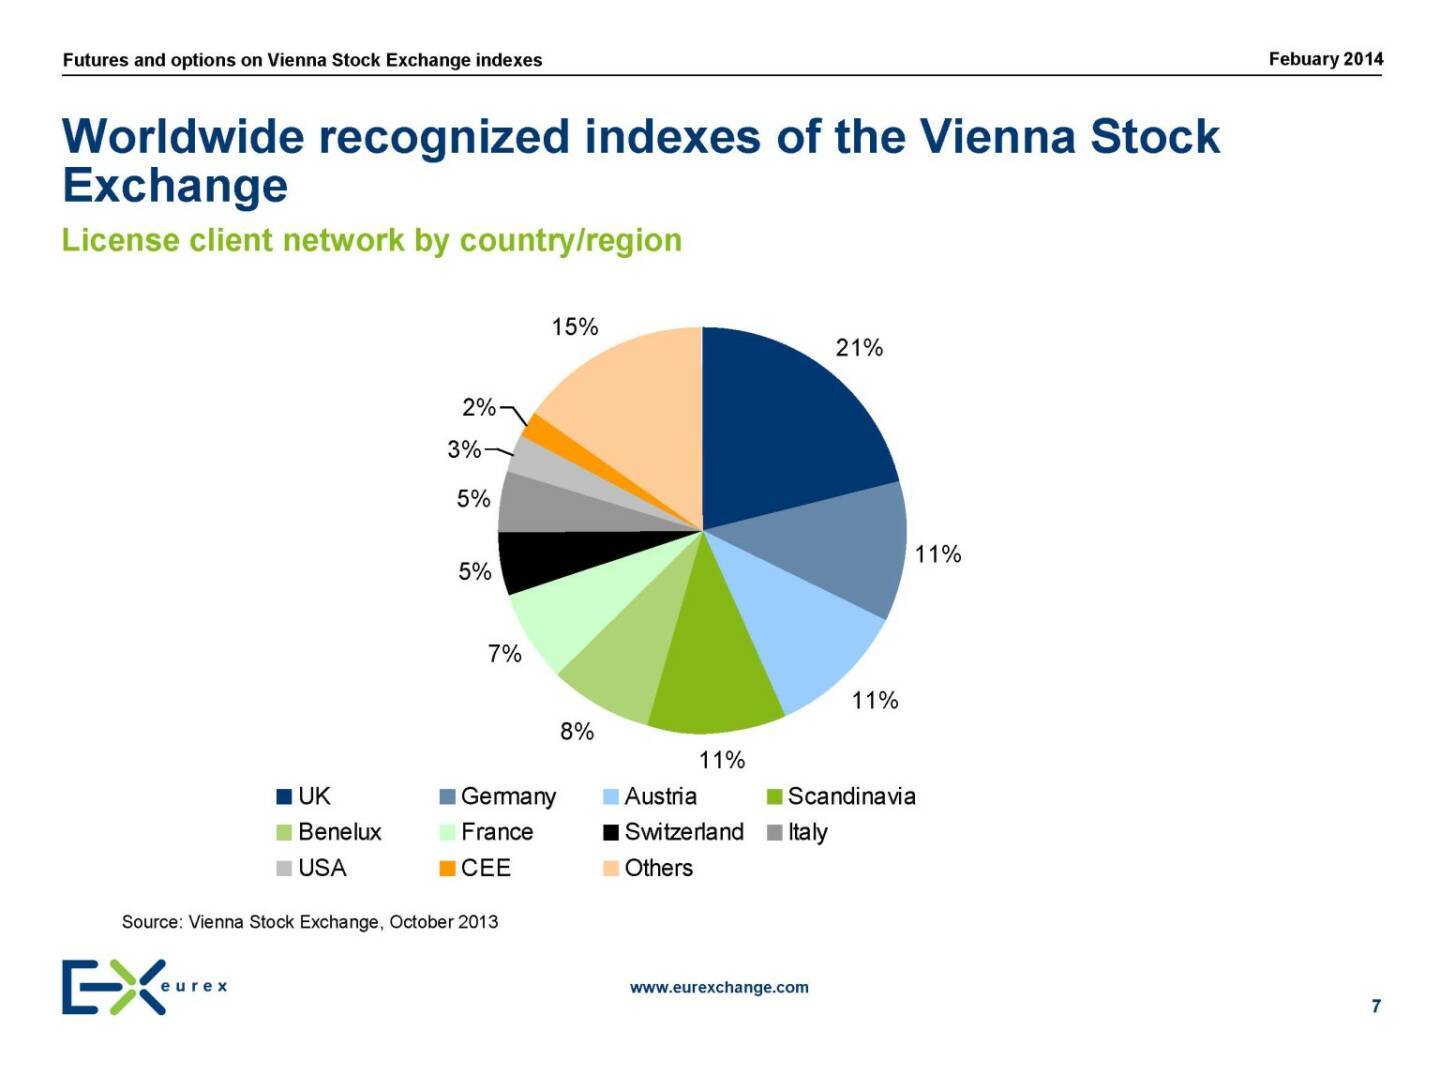 Worldwide recognized indexes of the Vienna Stock Exchange